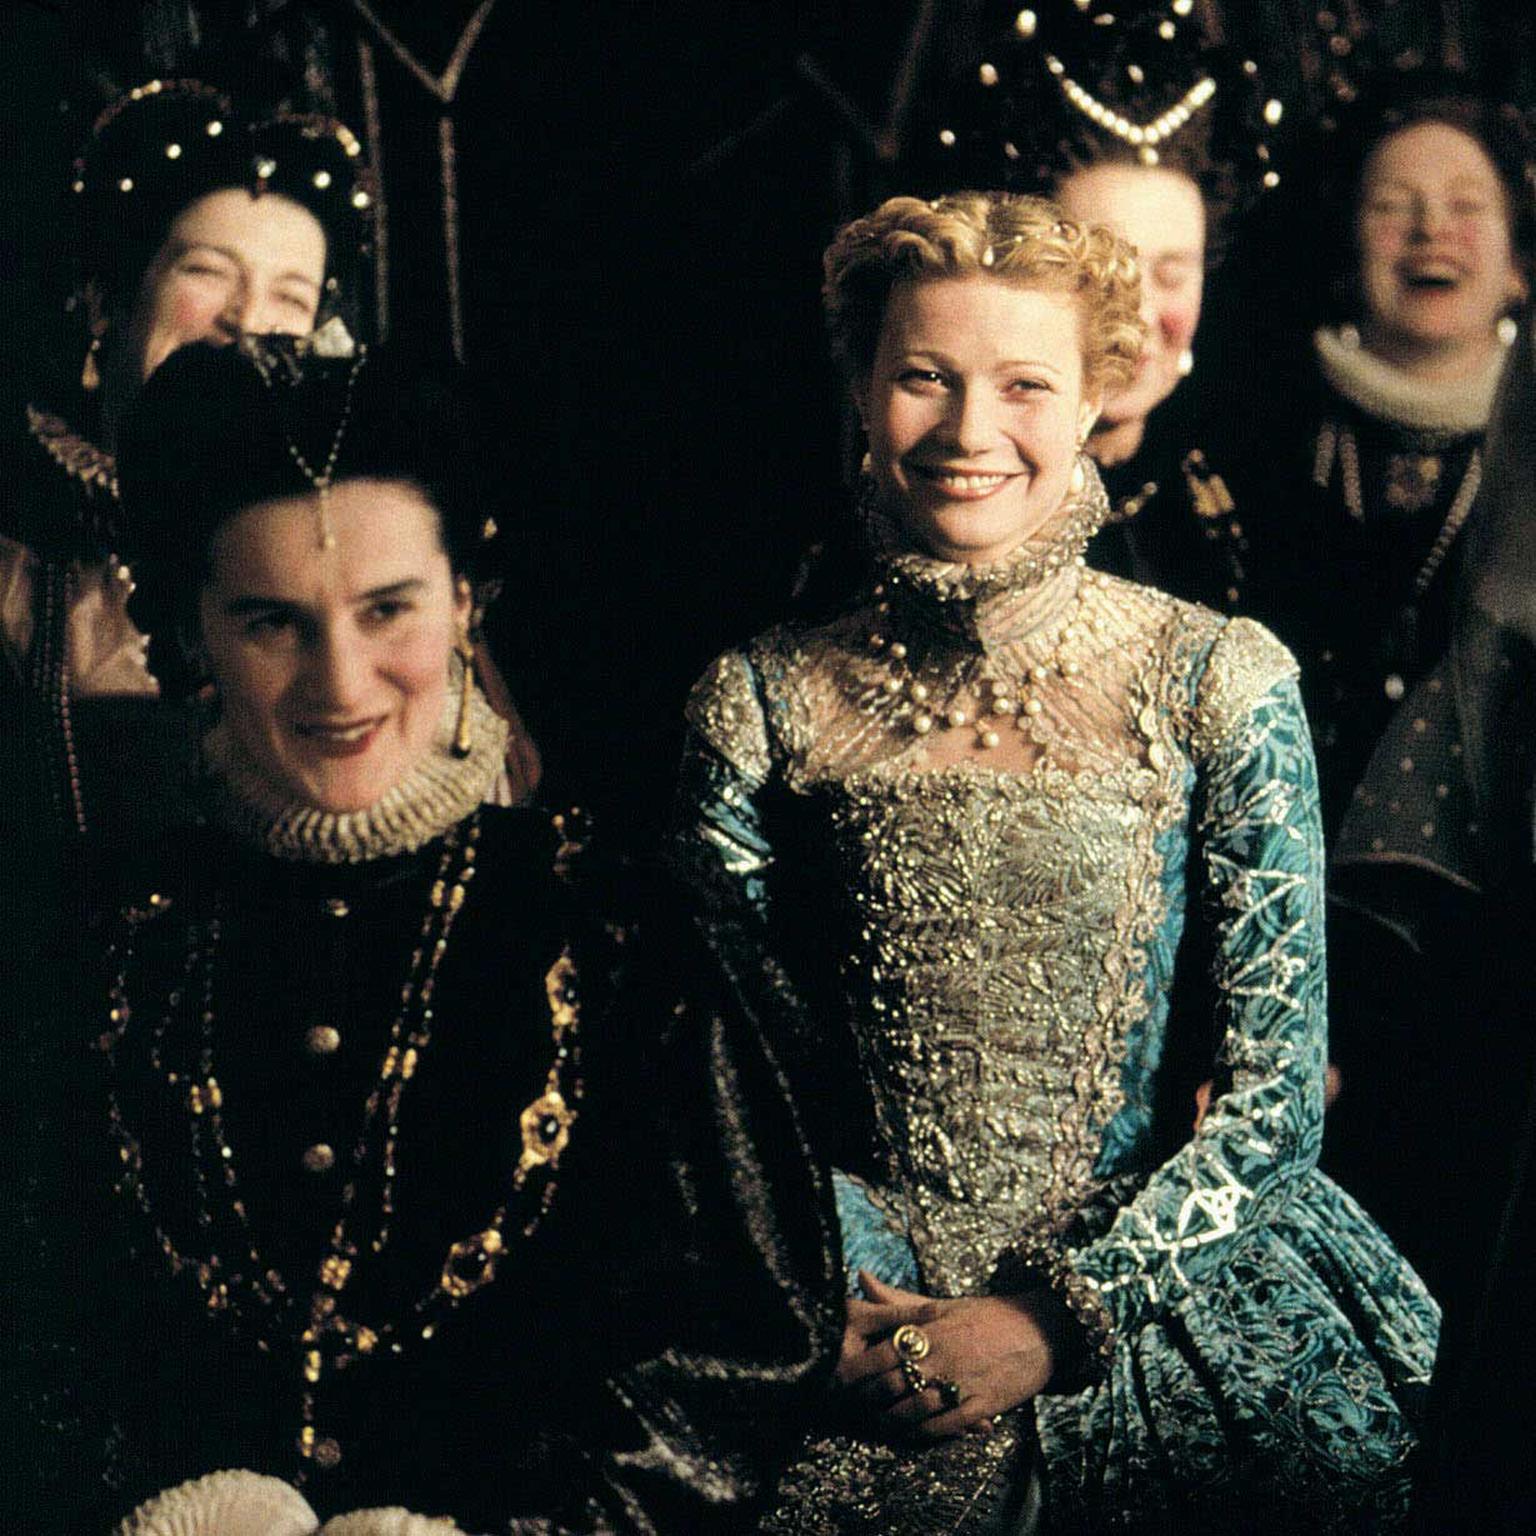 Gwyneth Paltrow models the jewels of the Era in the film Shakespeare in Love